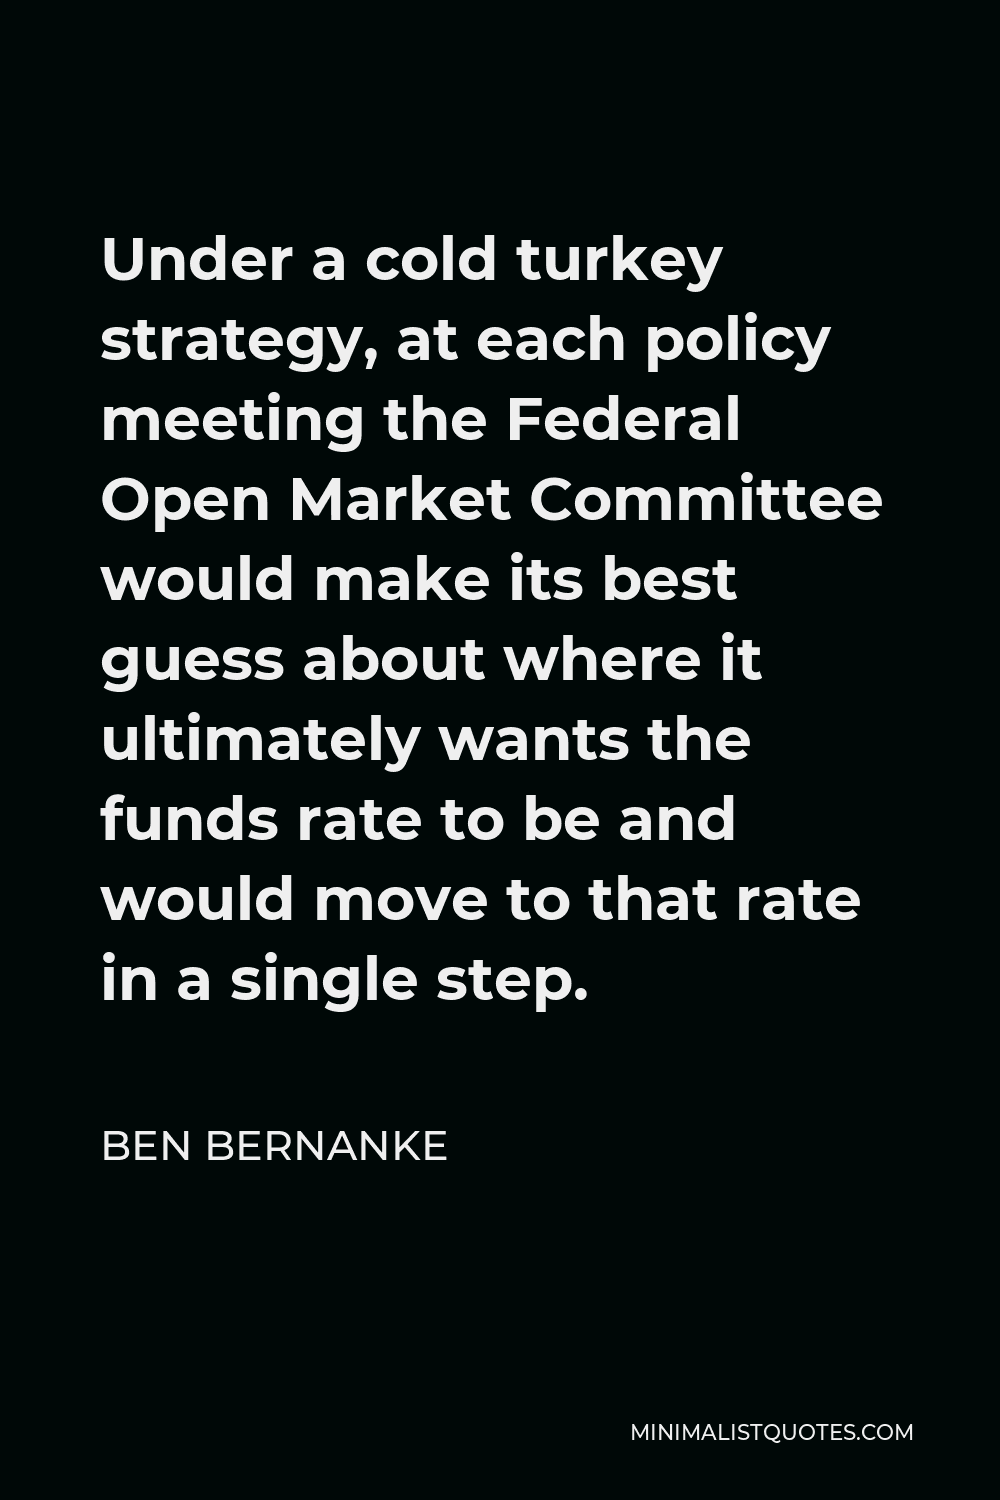 Ben Bernanke Quote - Under a cold turkey strategy, at each policy meeting the Federal Open Market Committee would make its best guess about where it ultimately wants the funds rate to be and would move to that rate in a single step.